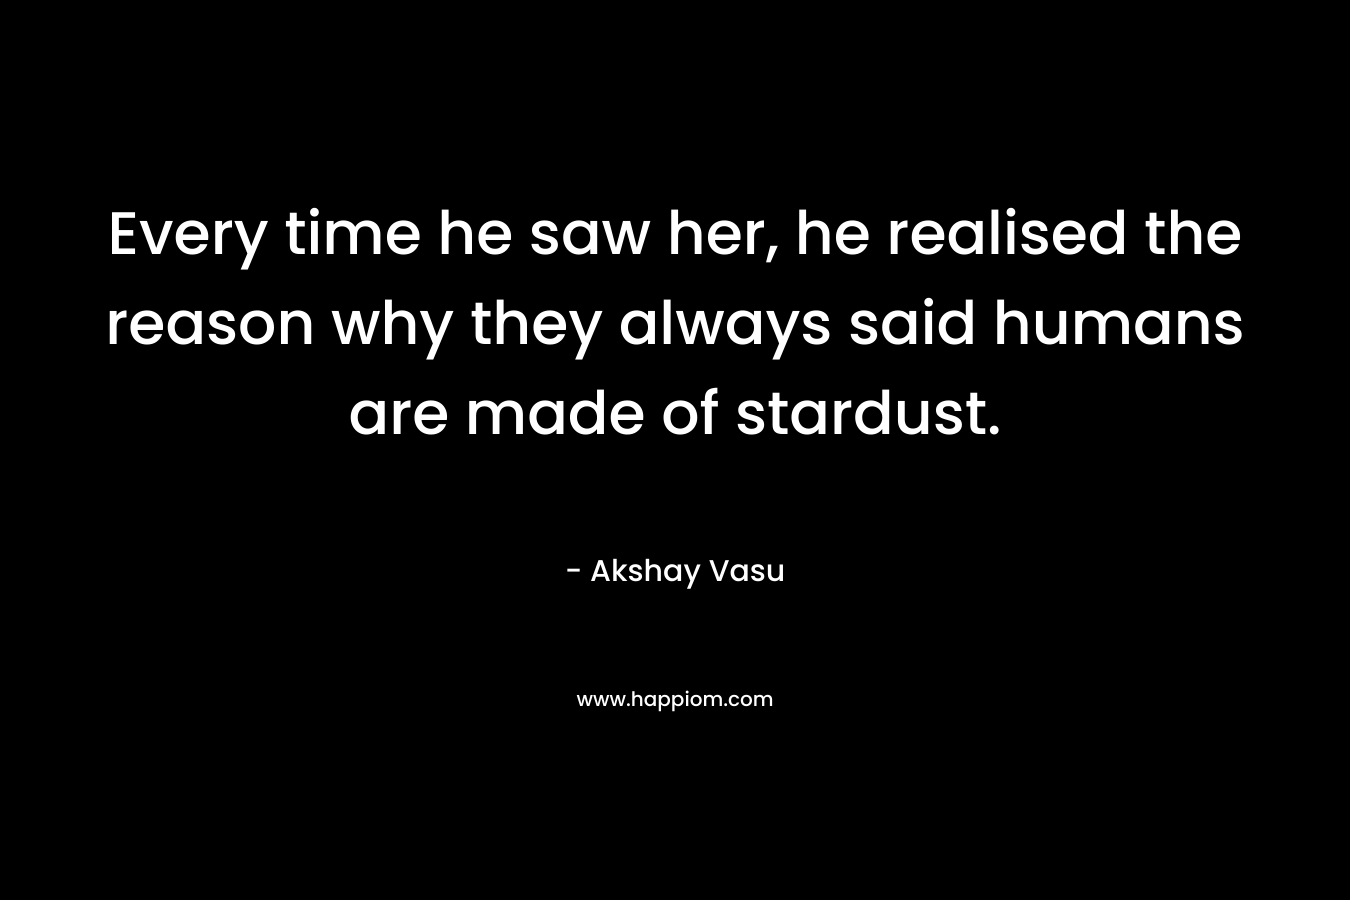 Every time he saw her, he realised the reason why they always said humans are made of stardust.